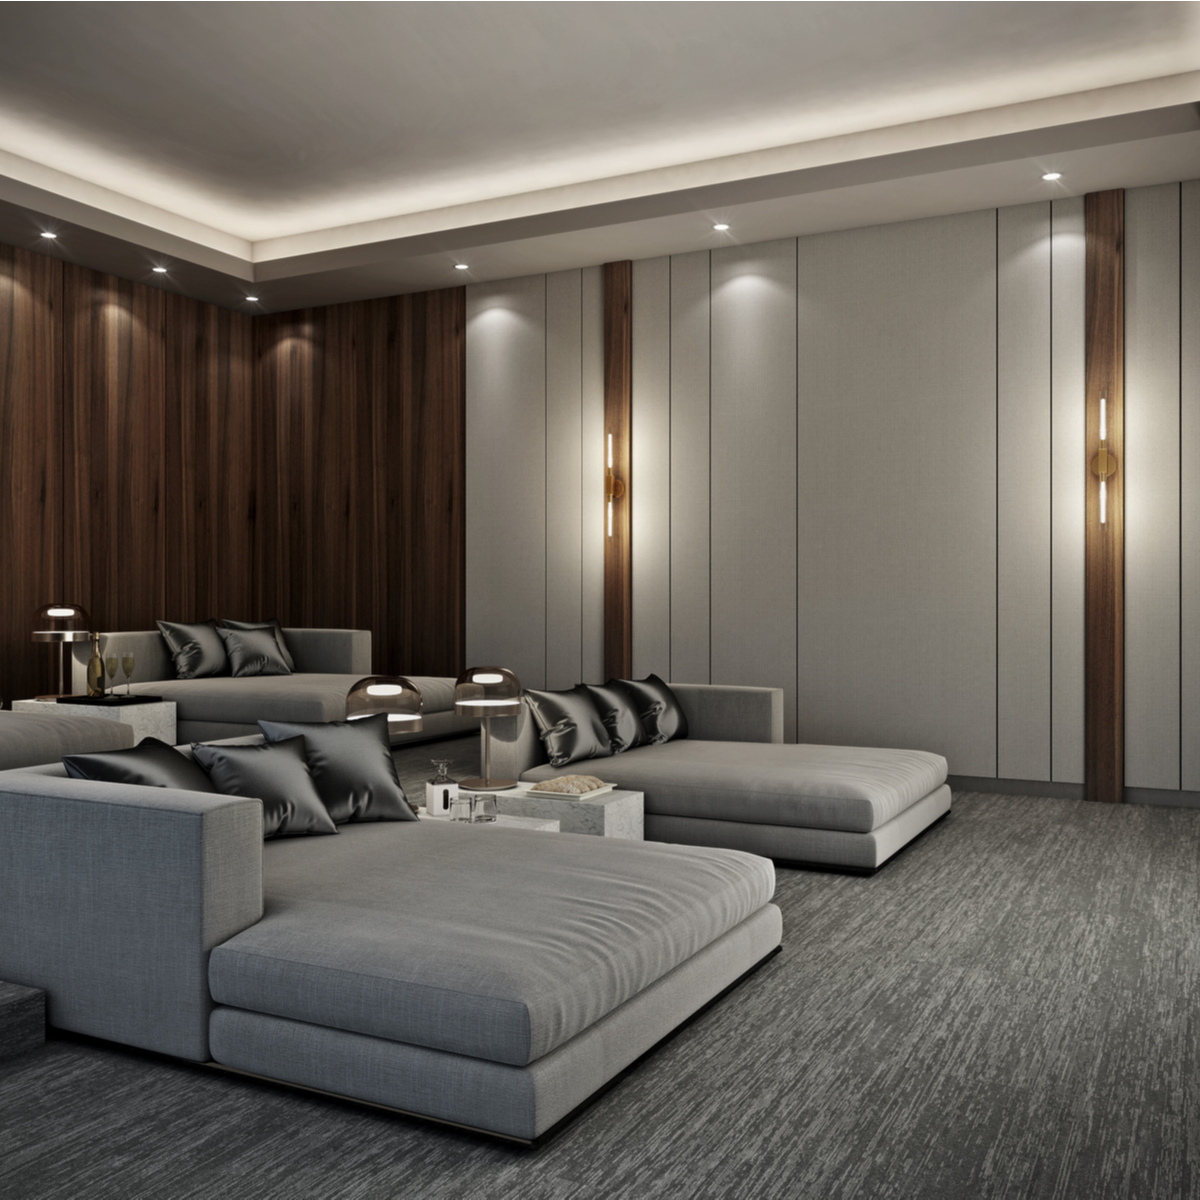 Find Out Why Lake Stevens Residents Trust Us For Custom Home Movie Theater System Installation